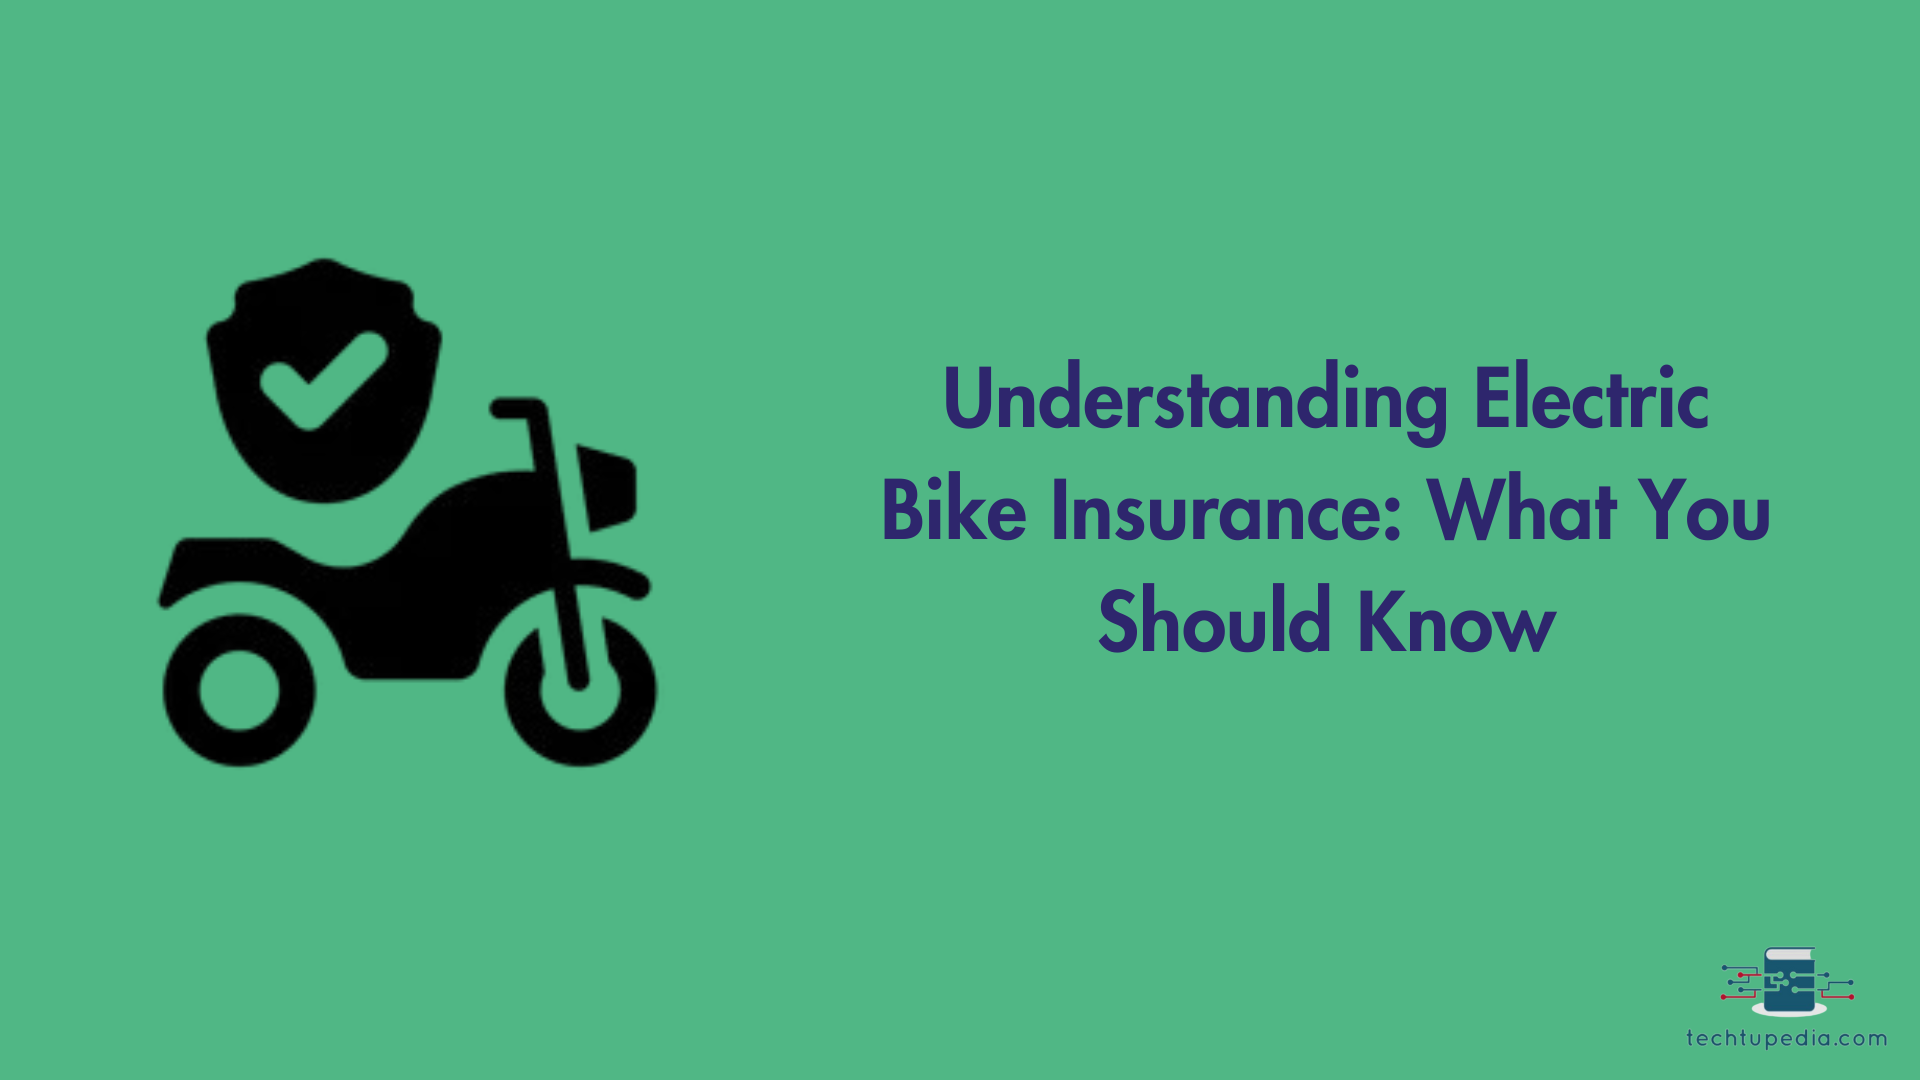 Understanding Electric Bike Insurance: What You Should Know